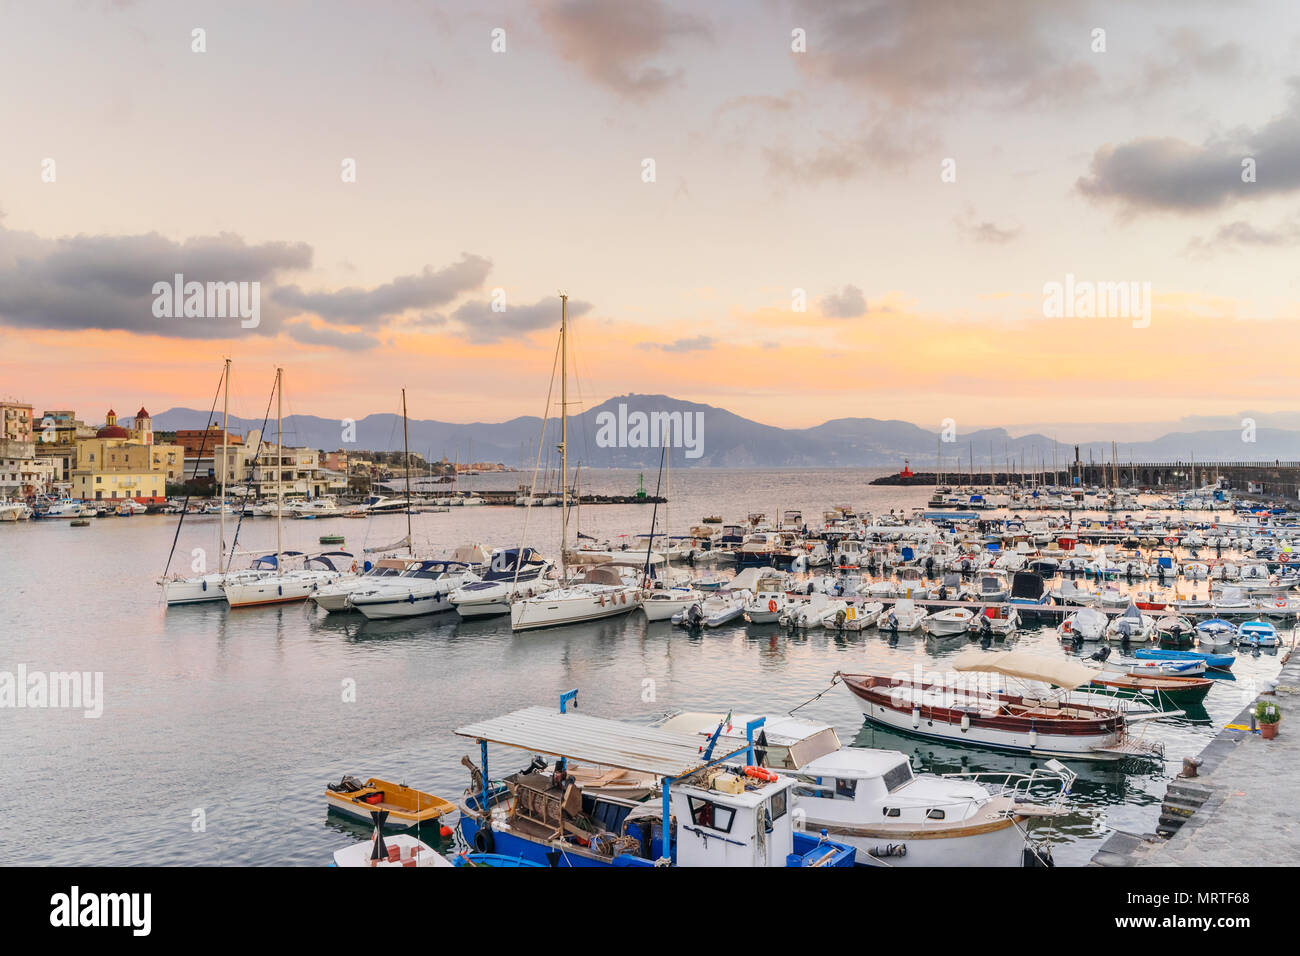 Boats and yatchs in the port of Torre del Greco in the gulf of Naples, on background Sorrento peninsula, Campania, Italy, Europe Stock Photo